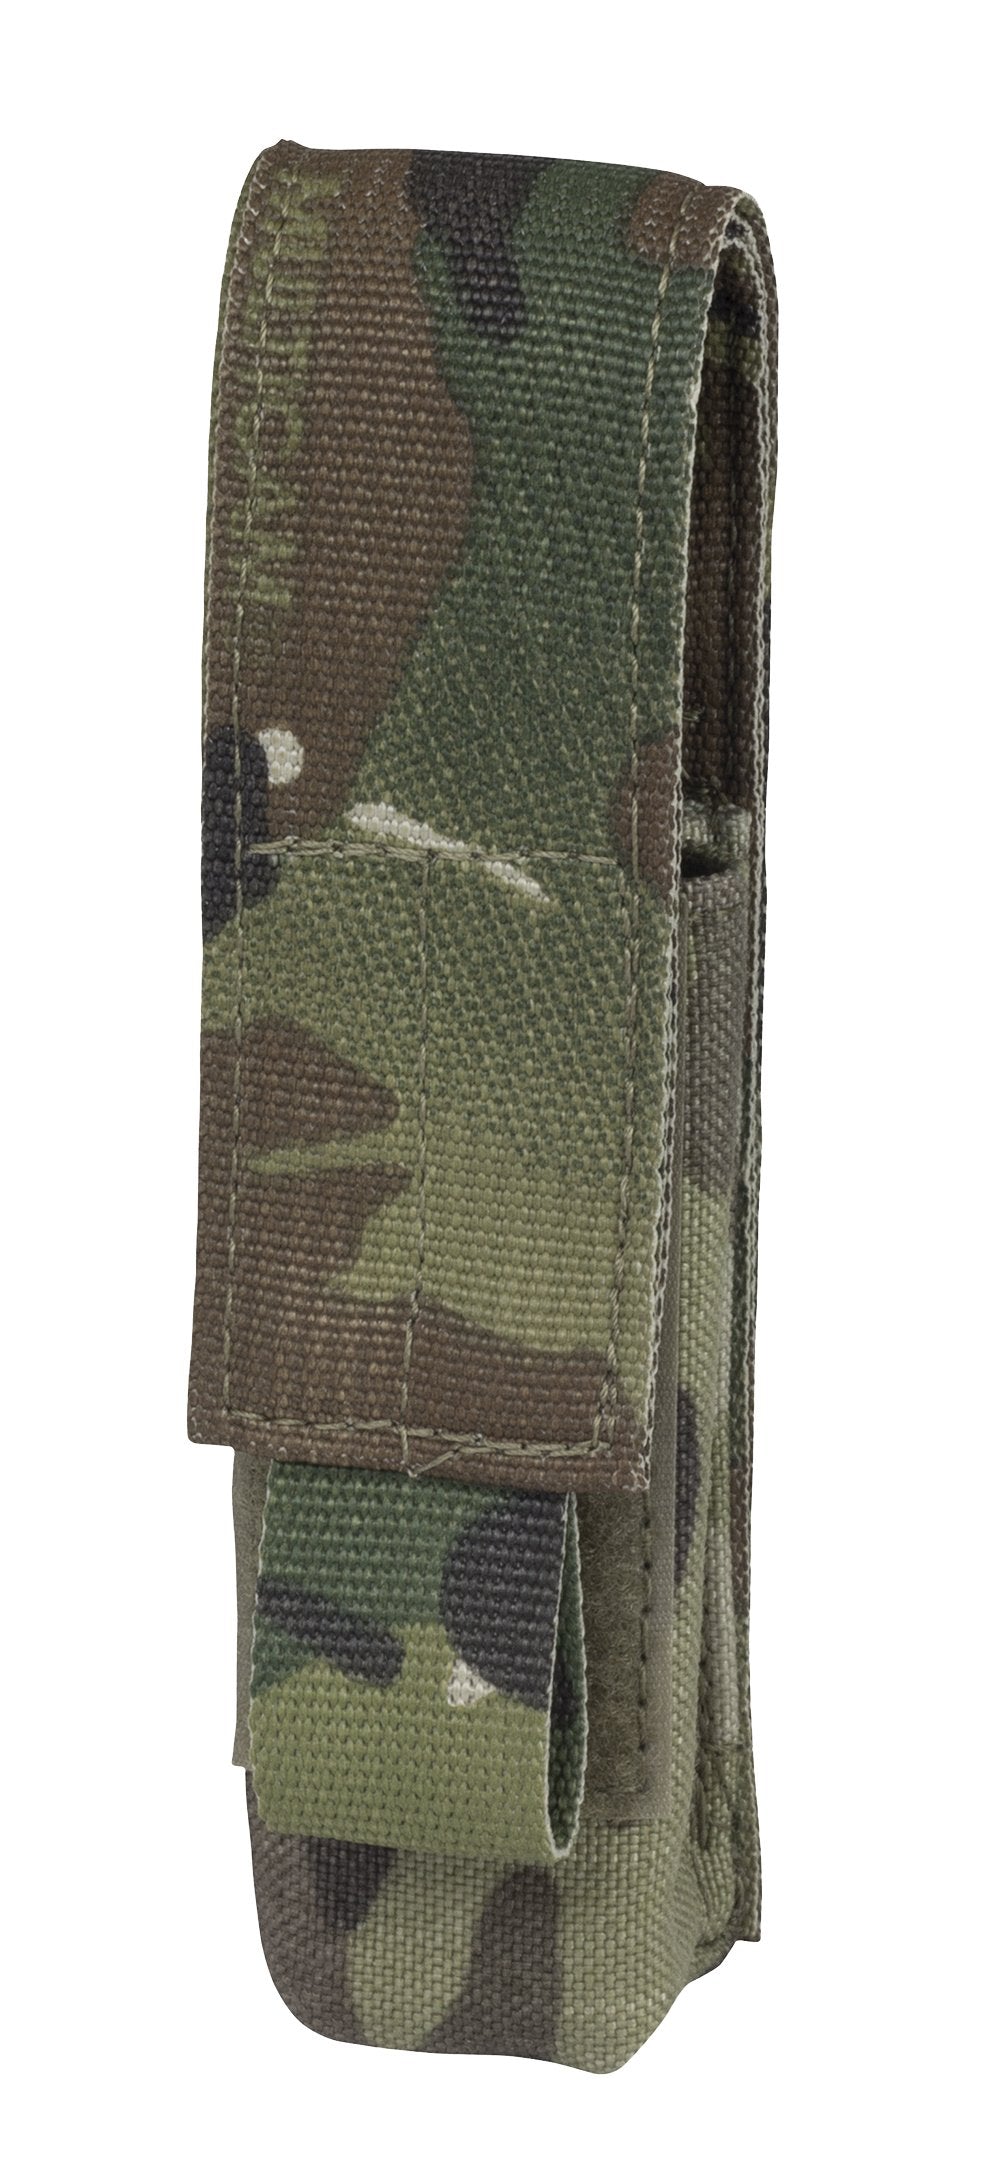 Elite Survival Systems Flashlight MOLLE Pouch with velcro flap, isolated on a white background.